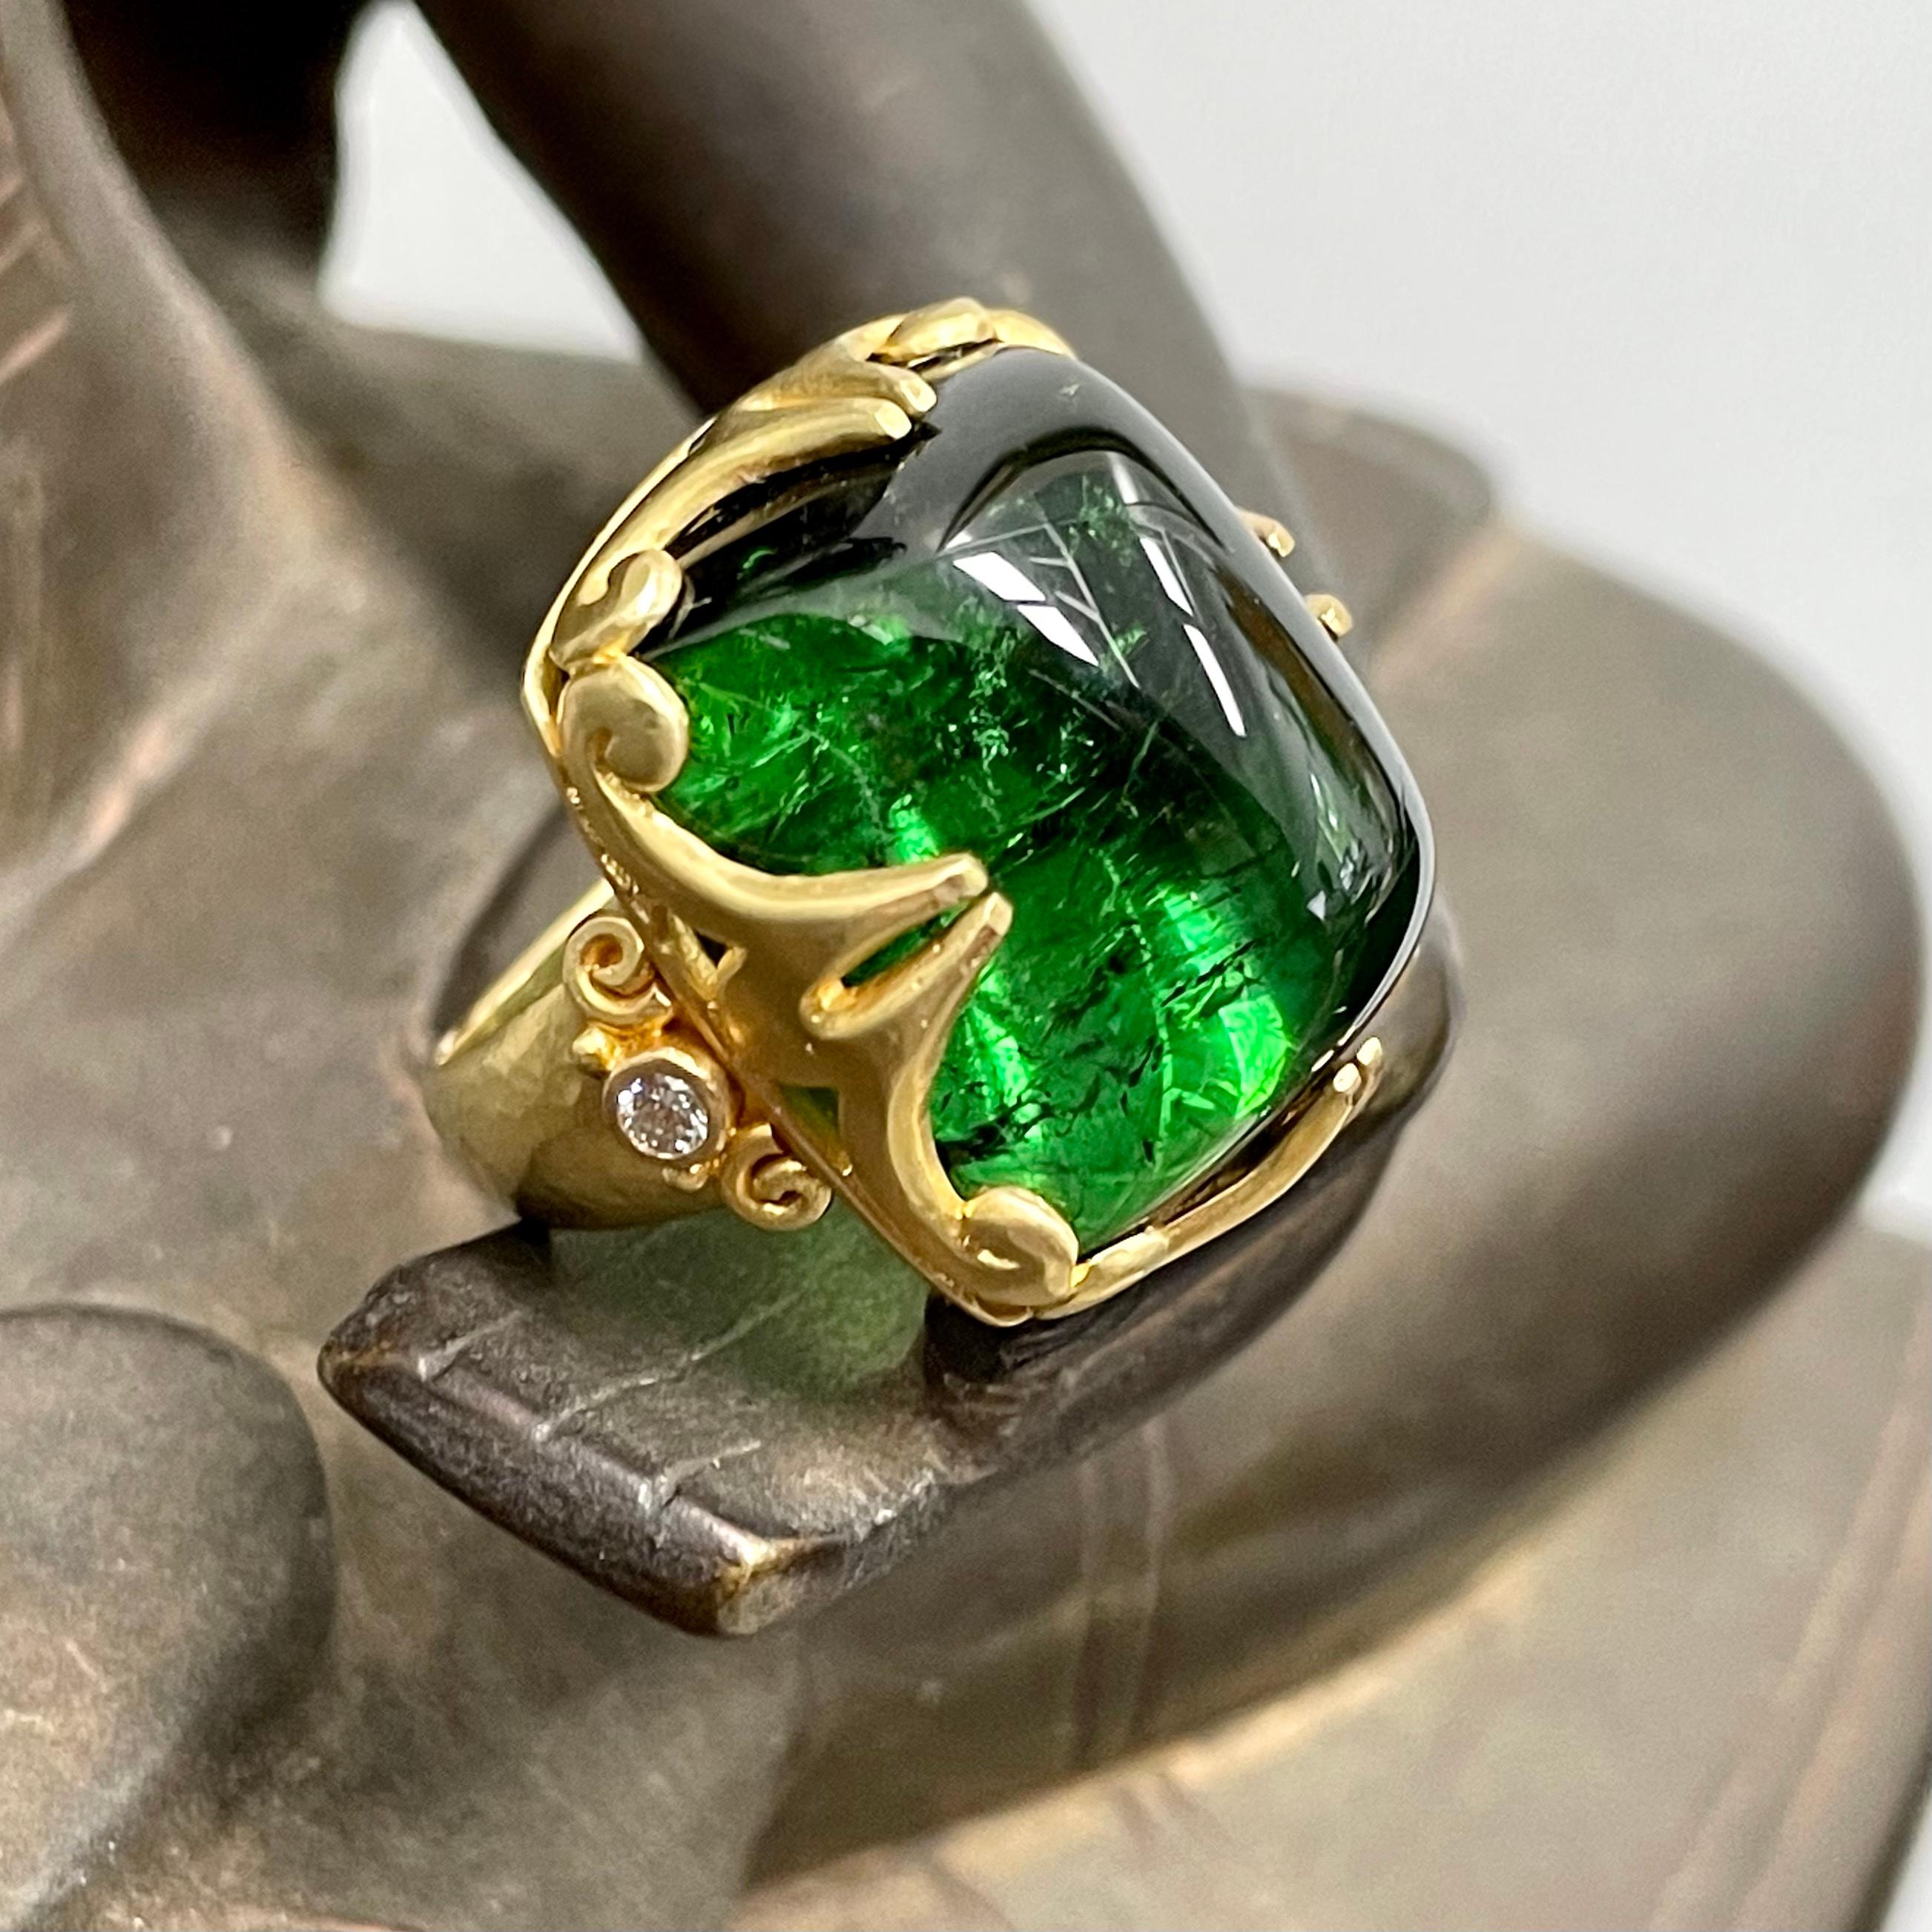 A brilliant Brazilian 16 x 19 mm cushion shaped green tourmaline cabochon is held lovingly in a carved double side prongs with spirals setting, atop a comfortable hammered matte-finish graduated band.  Two 2 mm VS1 side diamonds accent. This gumdrop